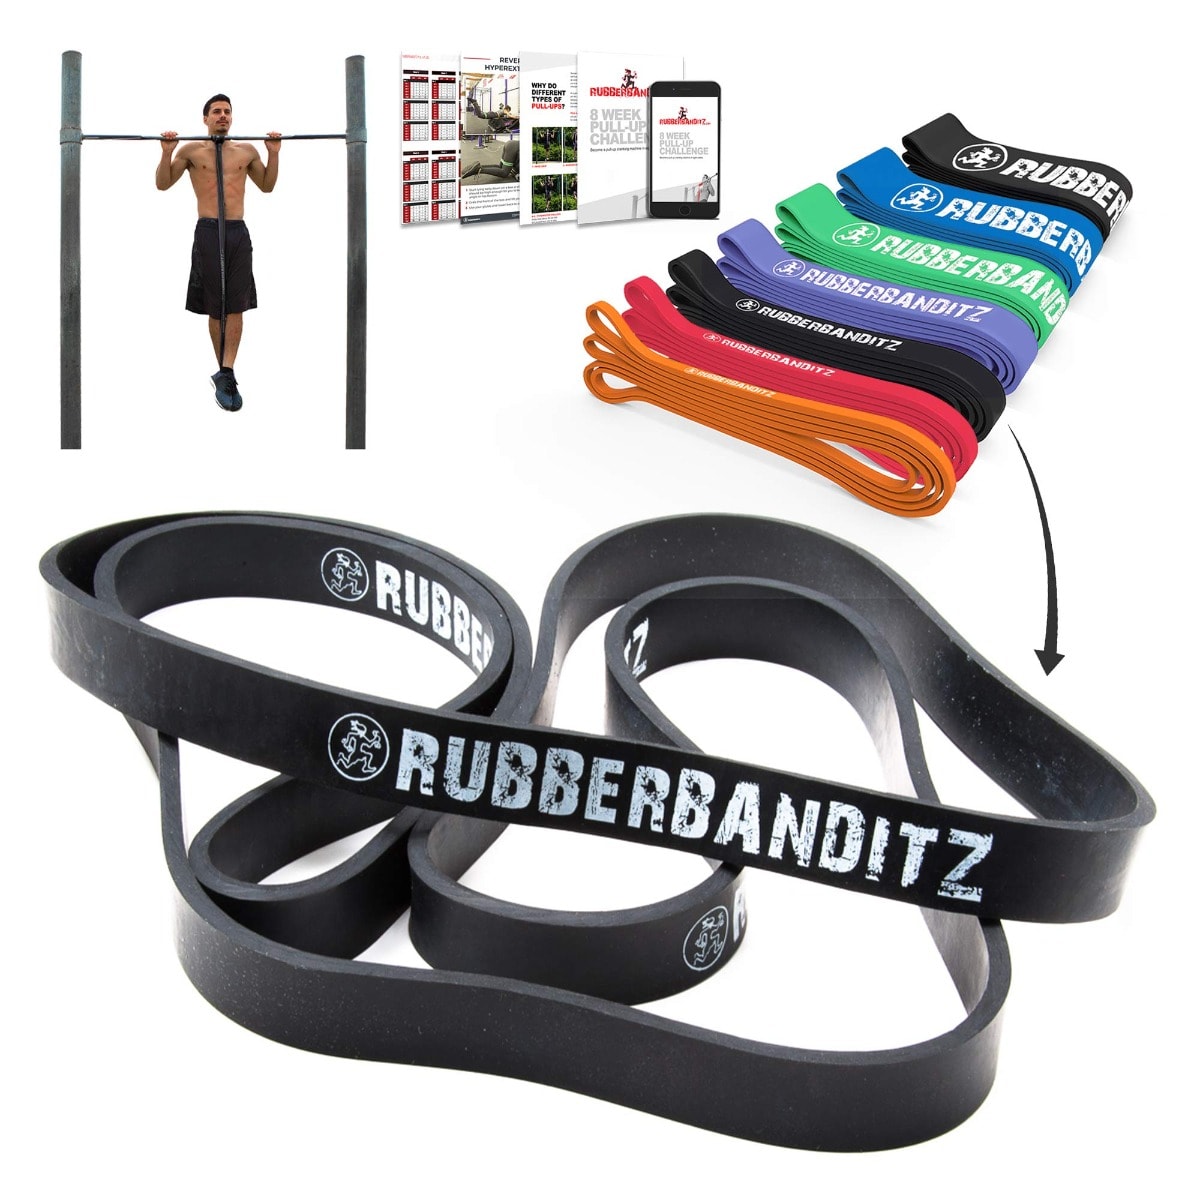 Giant Flat Bands  Bands for Pullups, Stretching, or Resisted Body Weight  Exercises